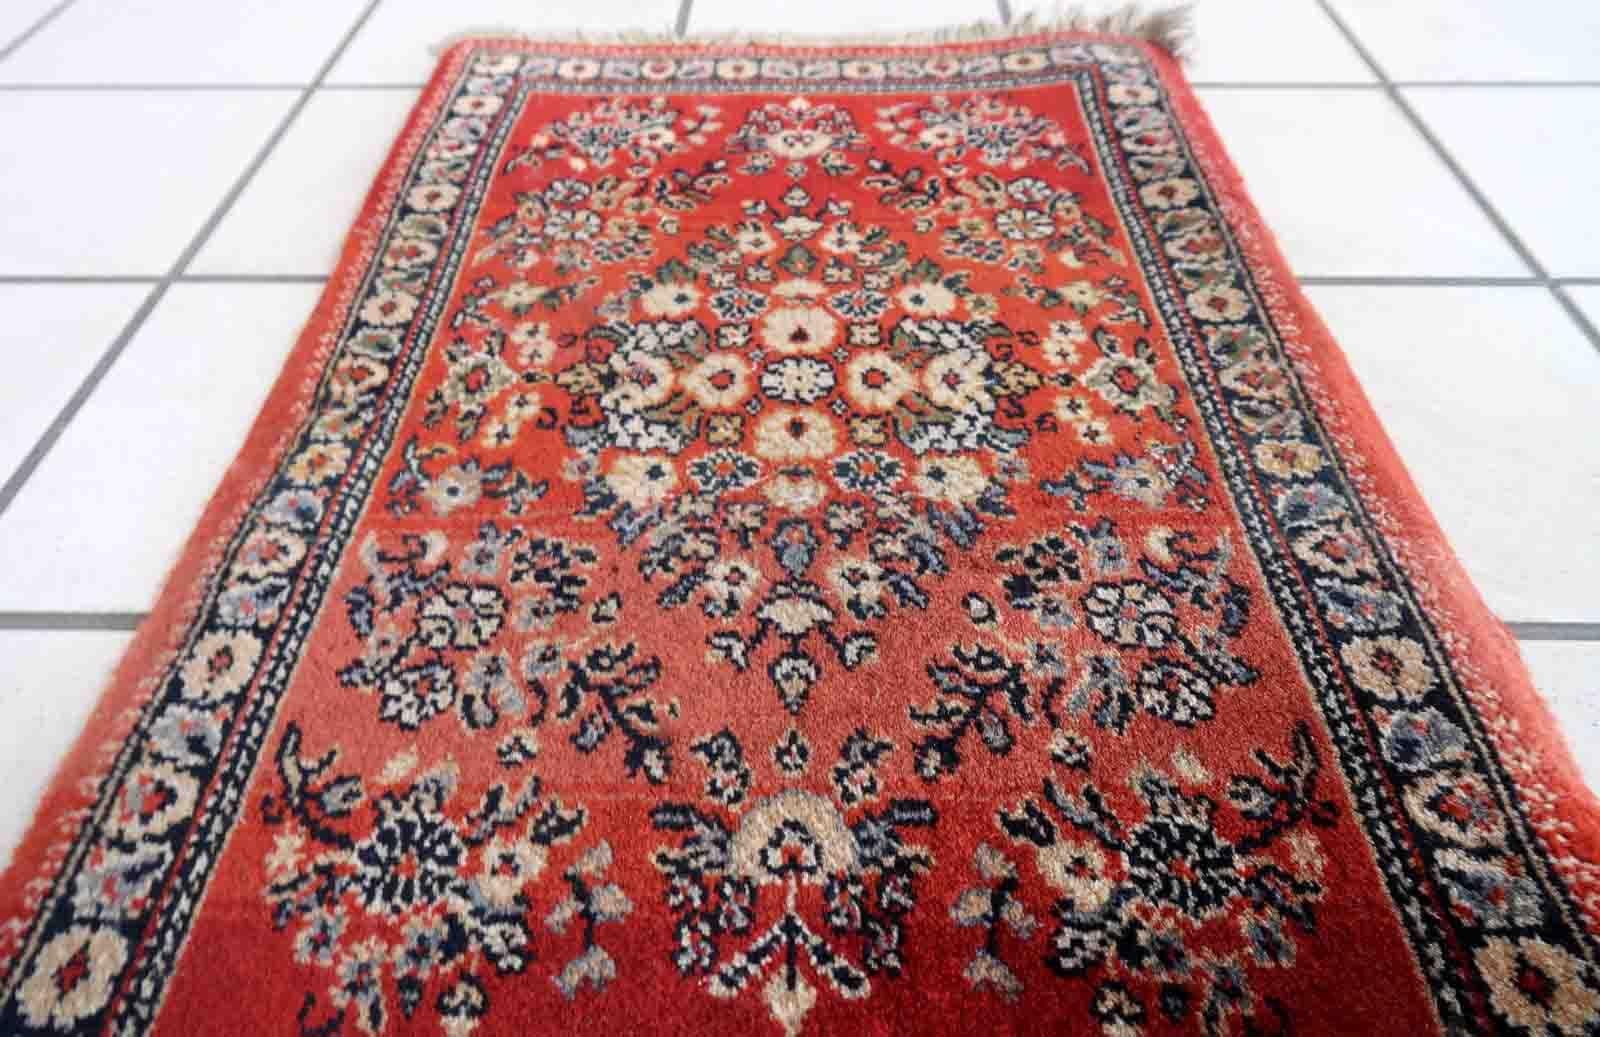 Vintage red German rug in traditional Persian Sarouk design. The rug has been made in the end of 20th century, it is in original good condition. The rug is machine made.

-condition: original good,

-circa: 1970s,

-size: 1.3' x 2' (42cm x